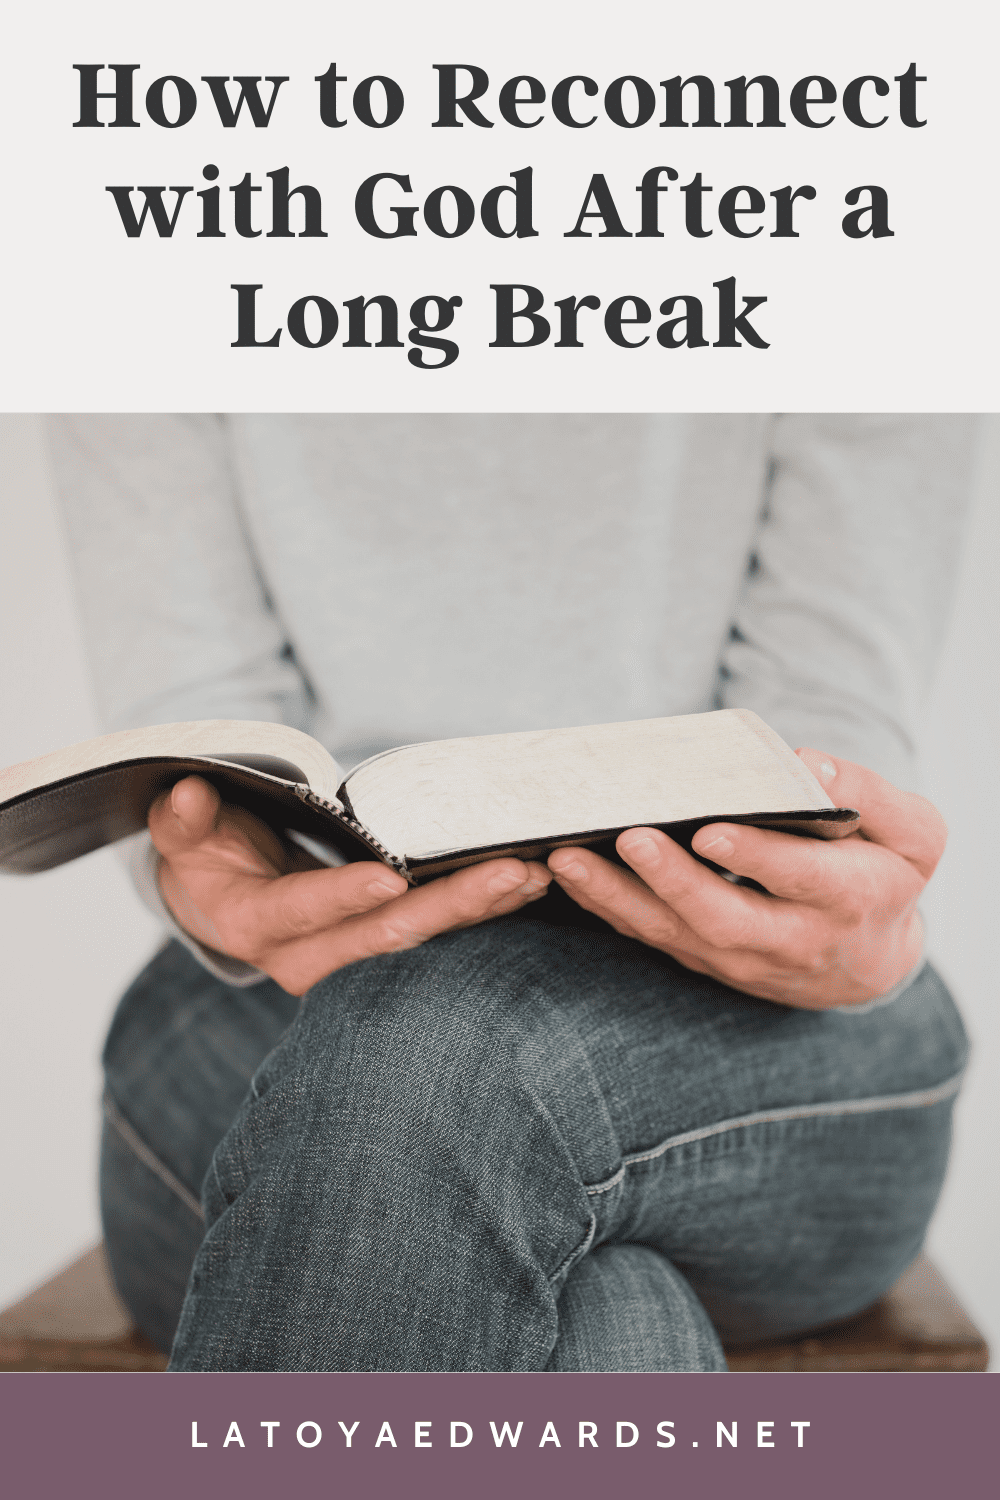 Are you ready to reconnect with God after a long (or short) time away? Learn how you can work your way back to a close relationship with God through consistent quiet times no matter how long it's been since you spent time in prayer or bible study.